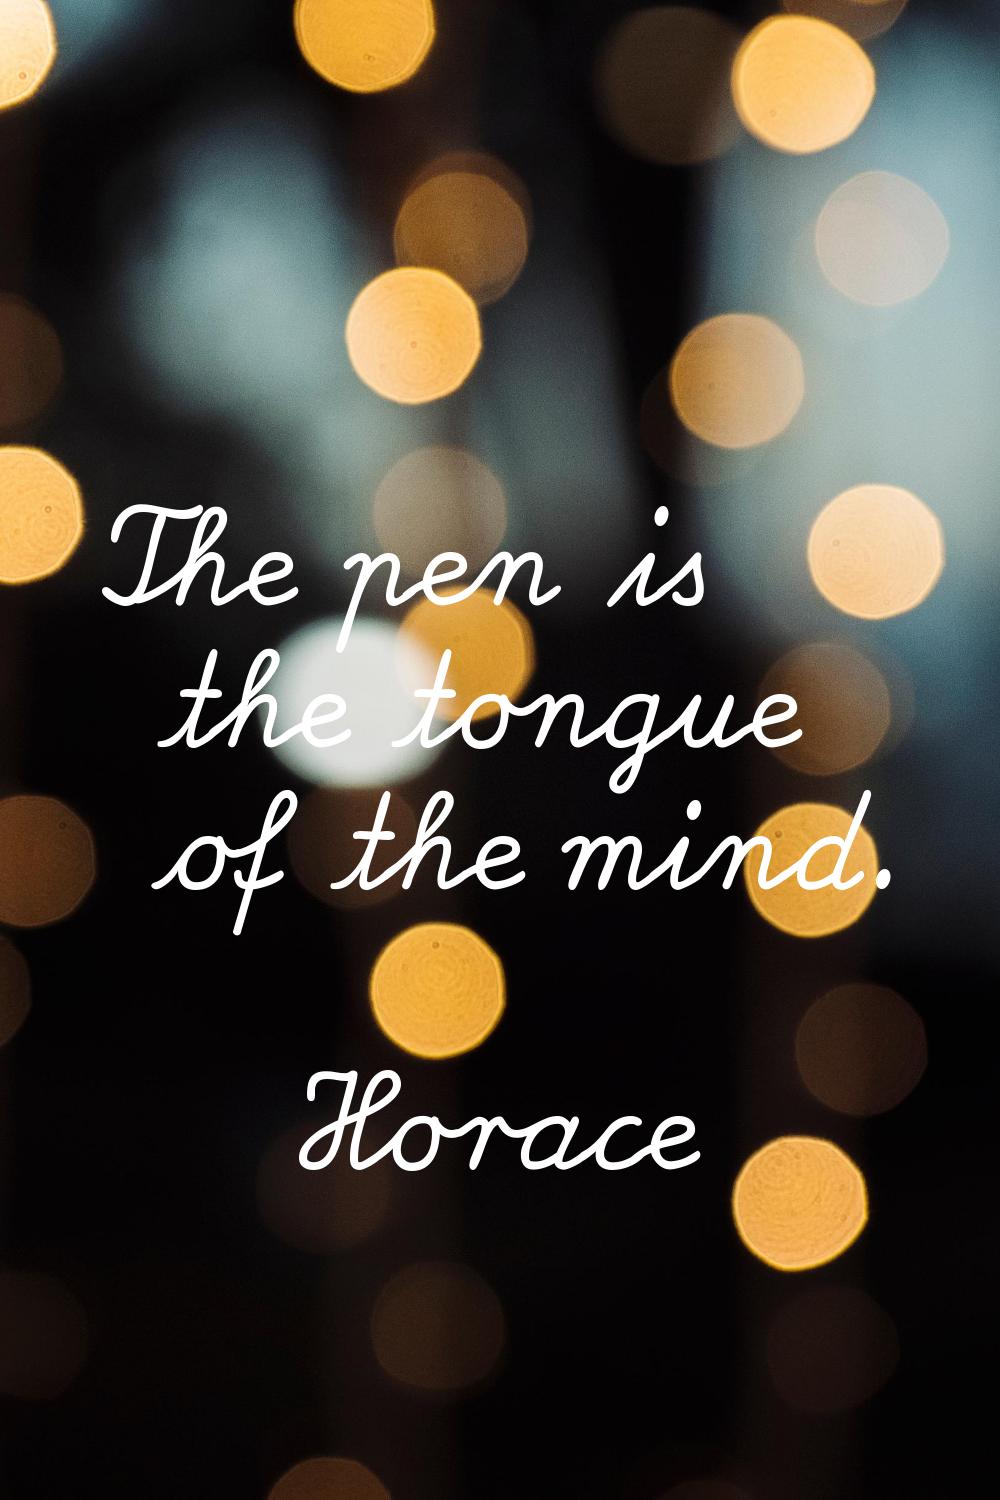 The pen is the tongue of the mind.